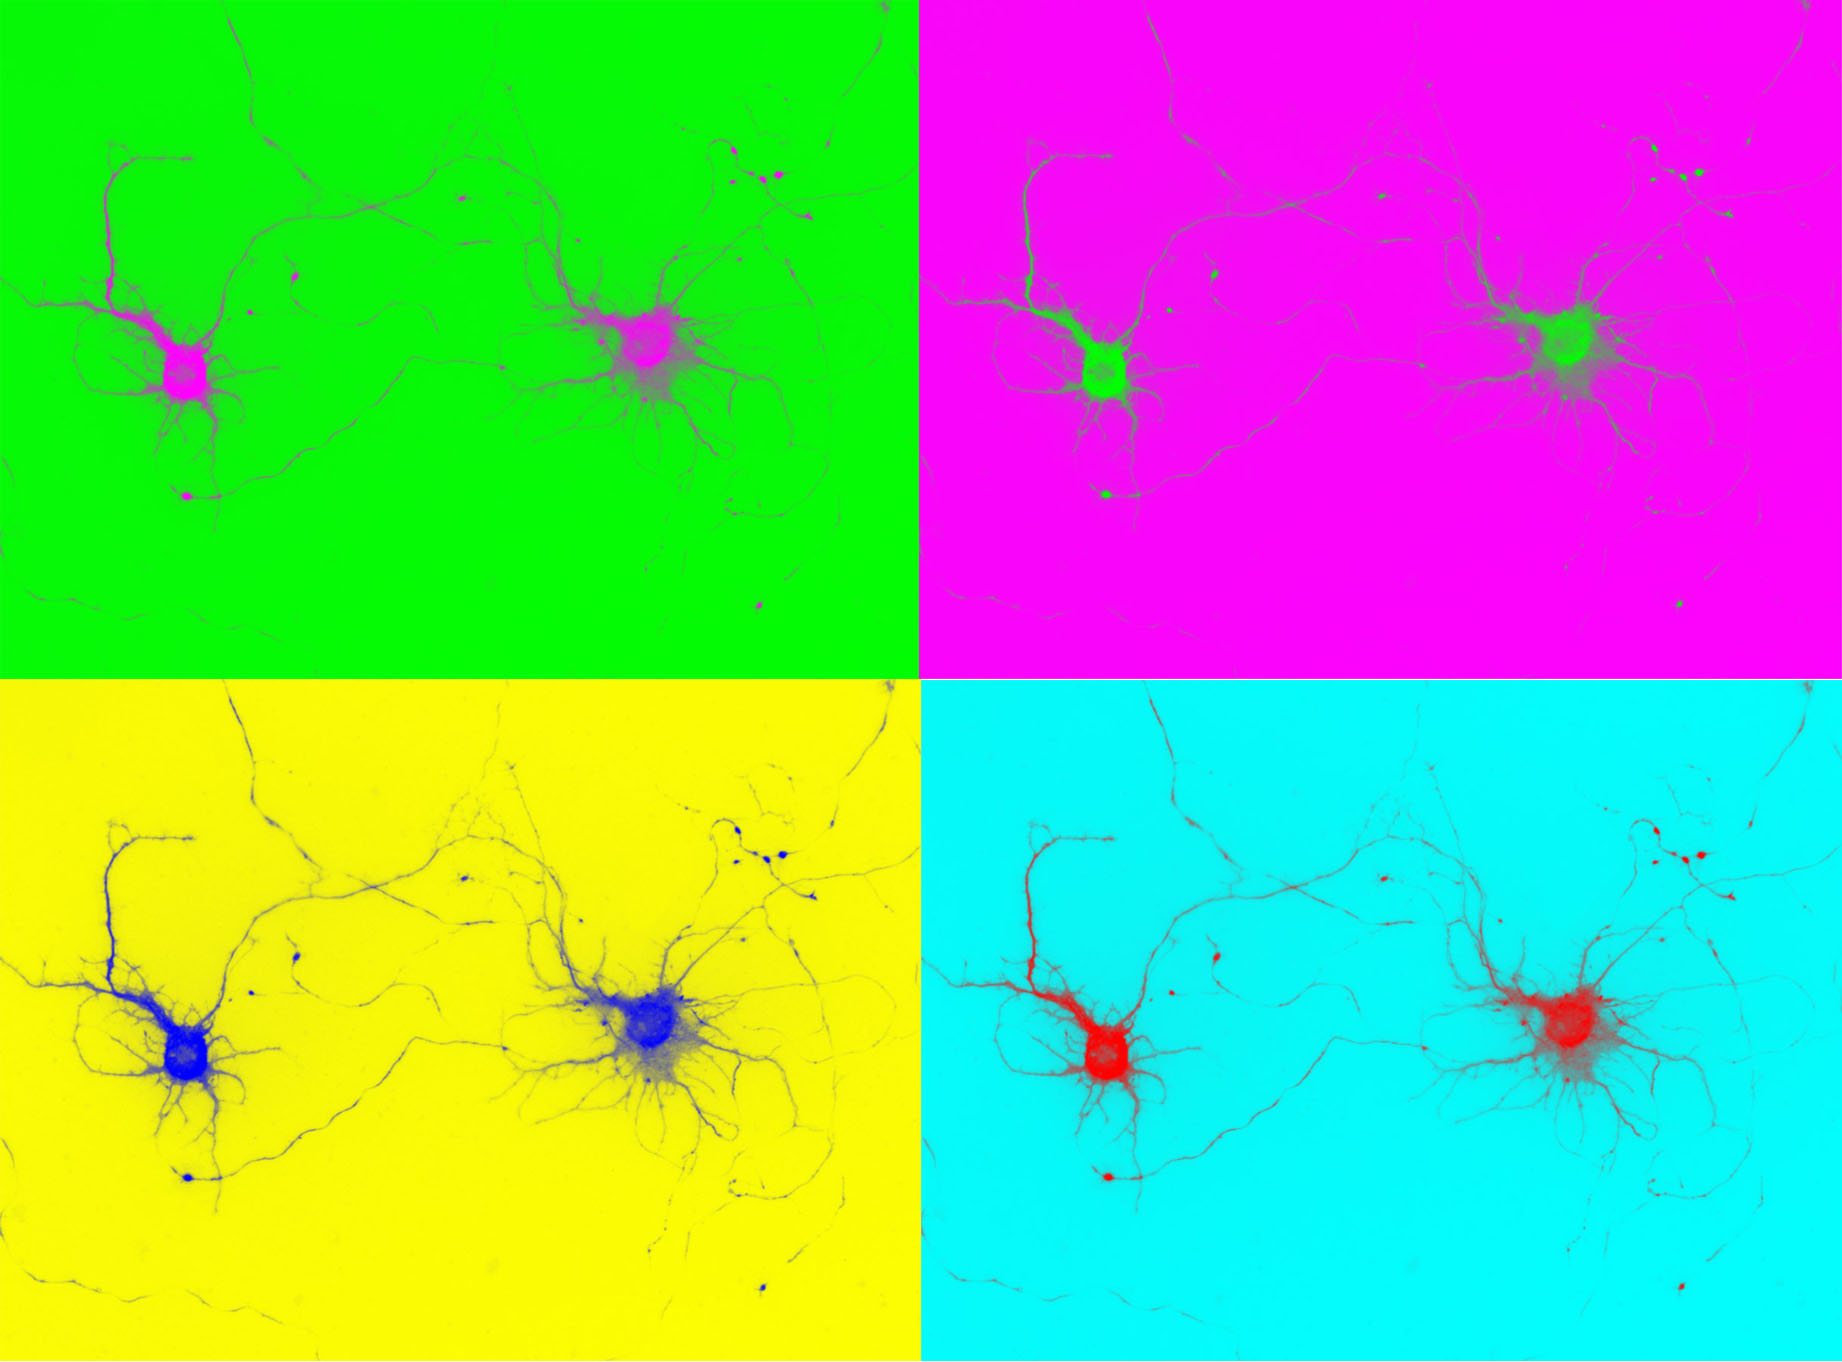 The image is a composite of 4 modification of the same image displaying 2 neurons making contact. Different background colours make a sharp contrast with the neurons that also have different bright colour.